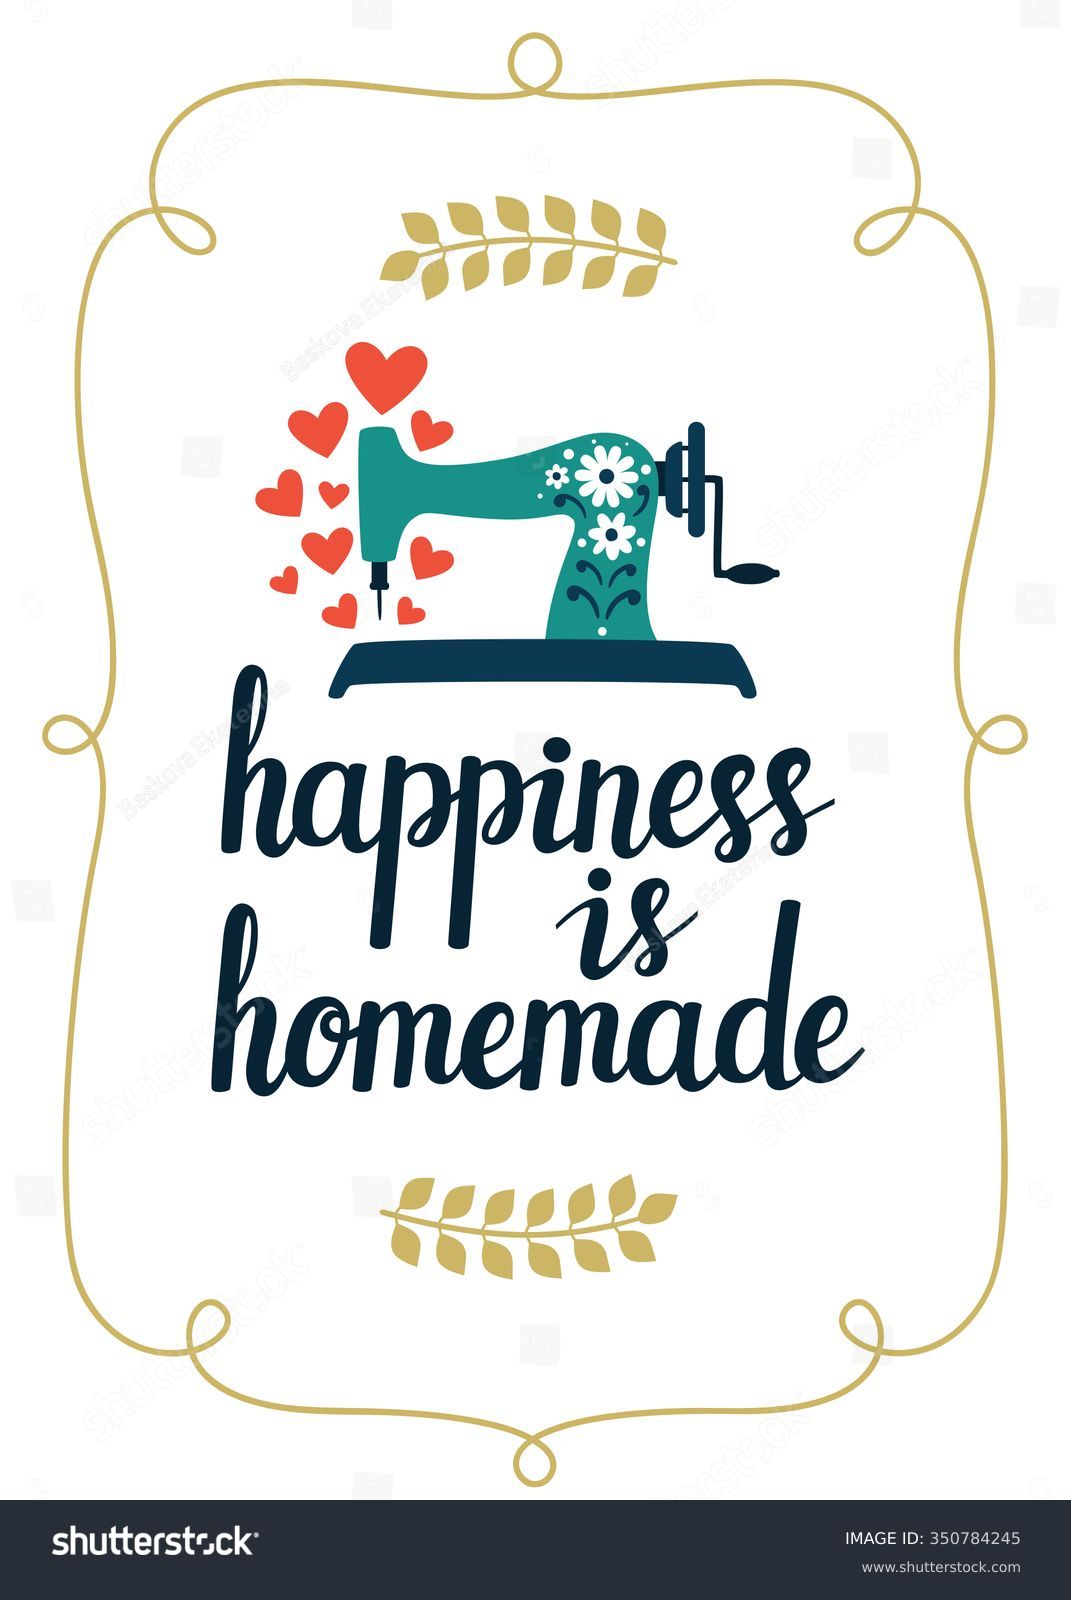 happiness is clipart - photo #36